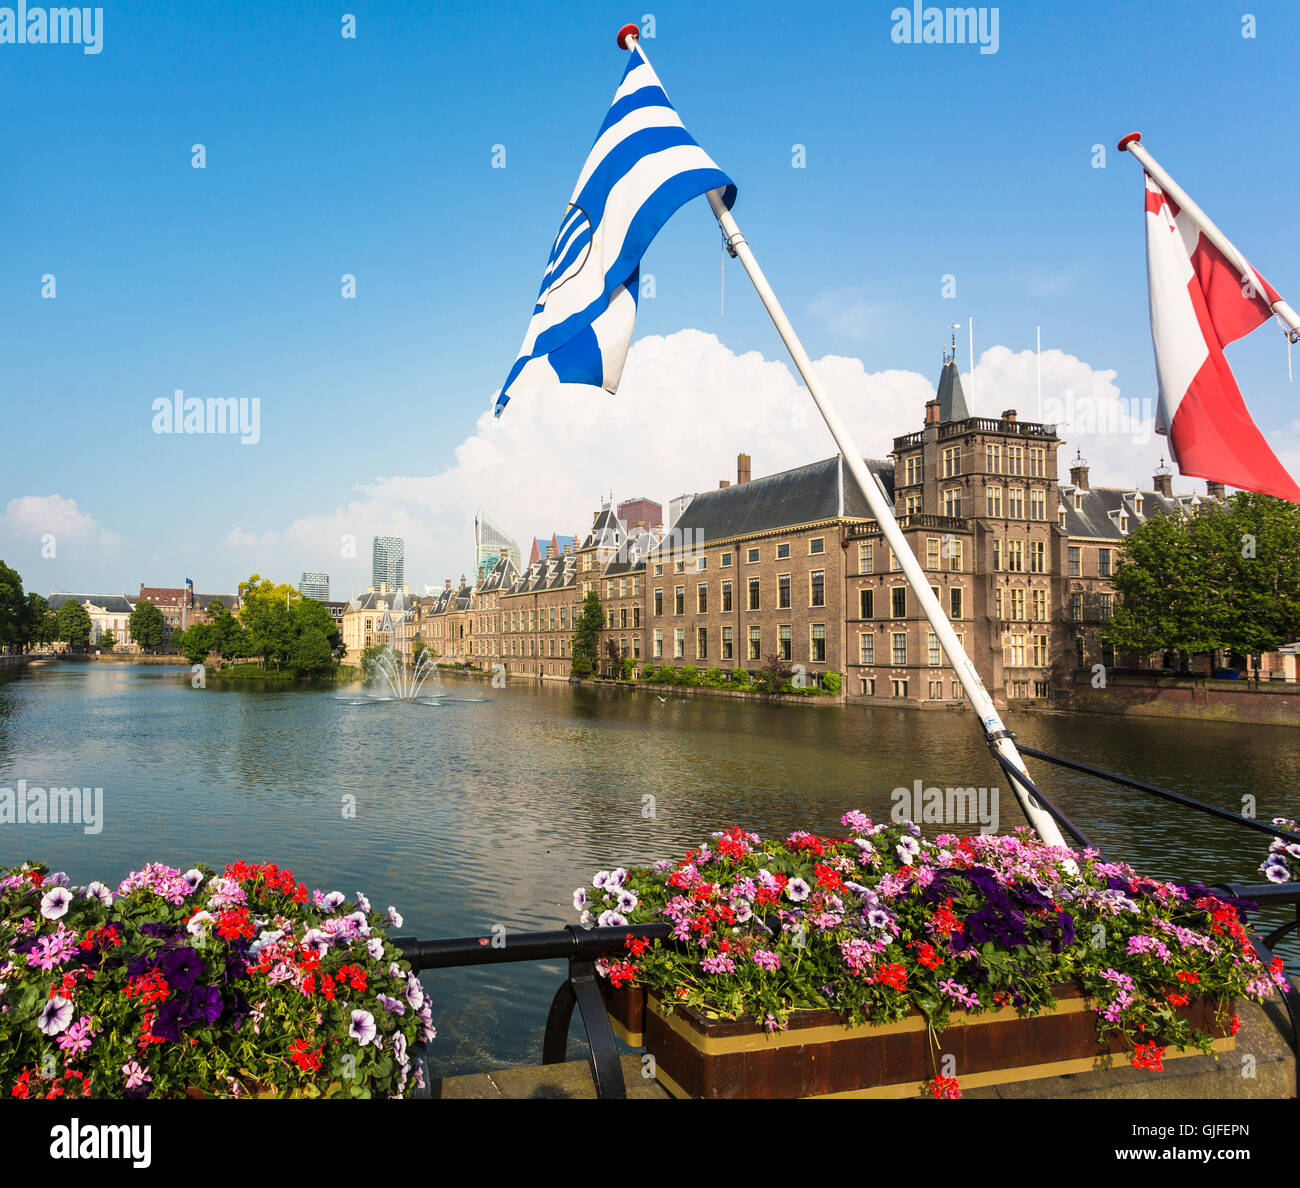 The Binnenhof  castle is the seat of the Dutch Parliamnet and prime minister office in the city of  The Hague Stock Photo